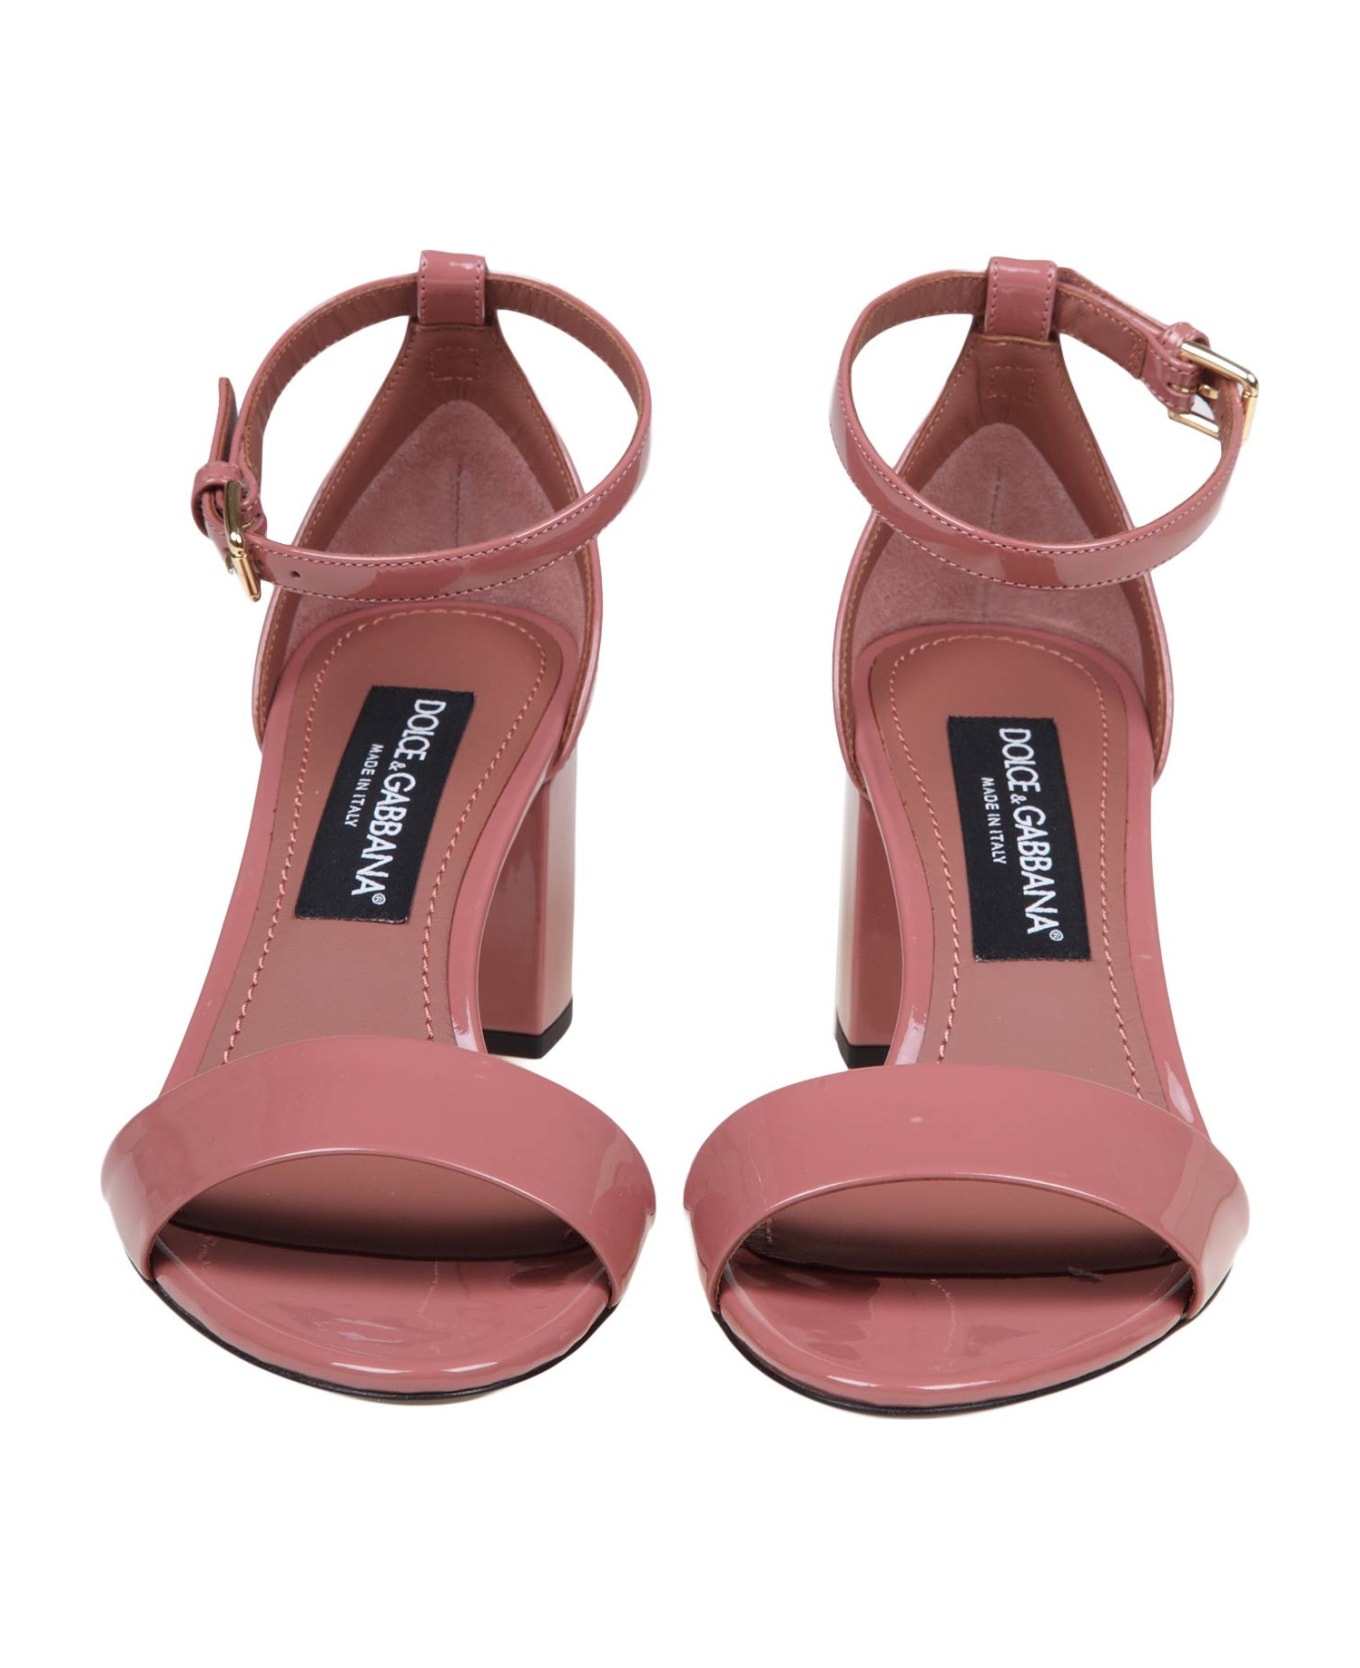 Dolce & Gabbana Pink Paint Leather Sandals - PINK サンダル